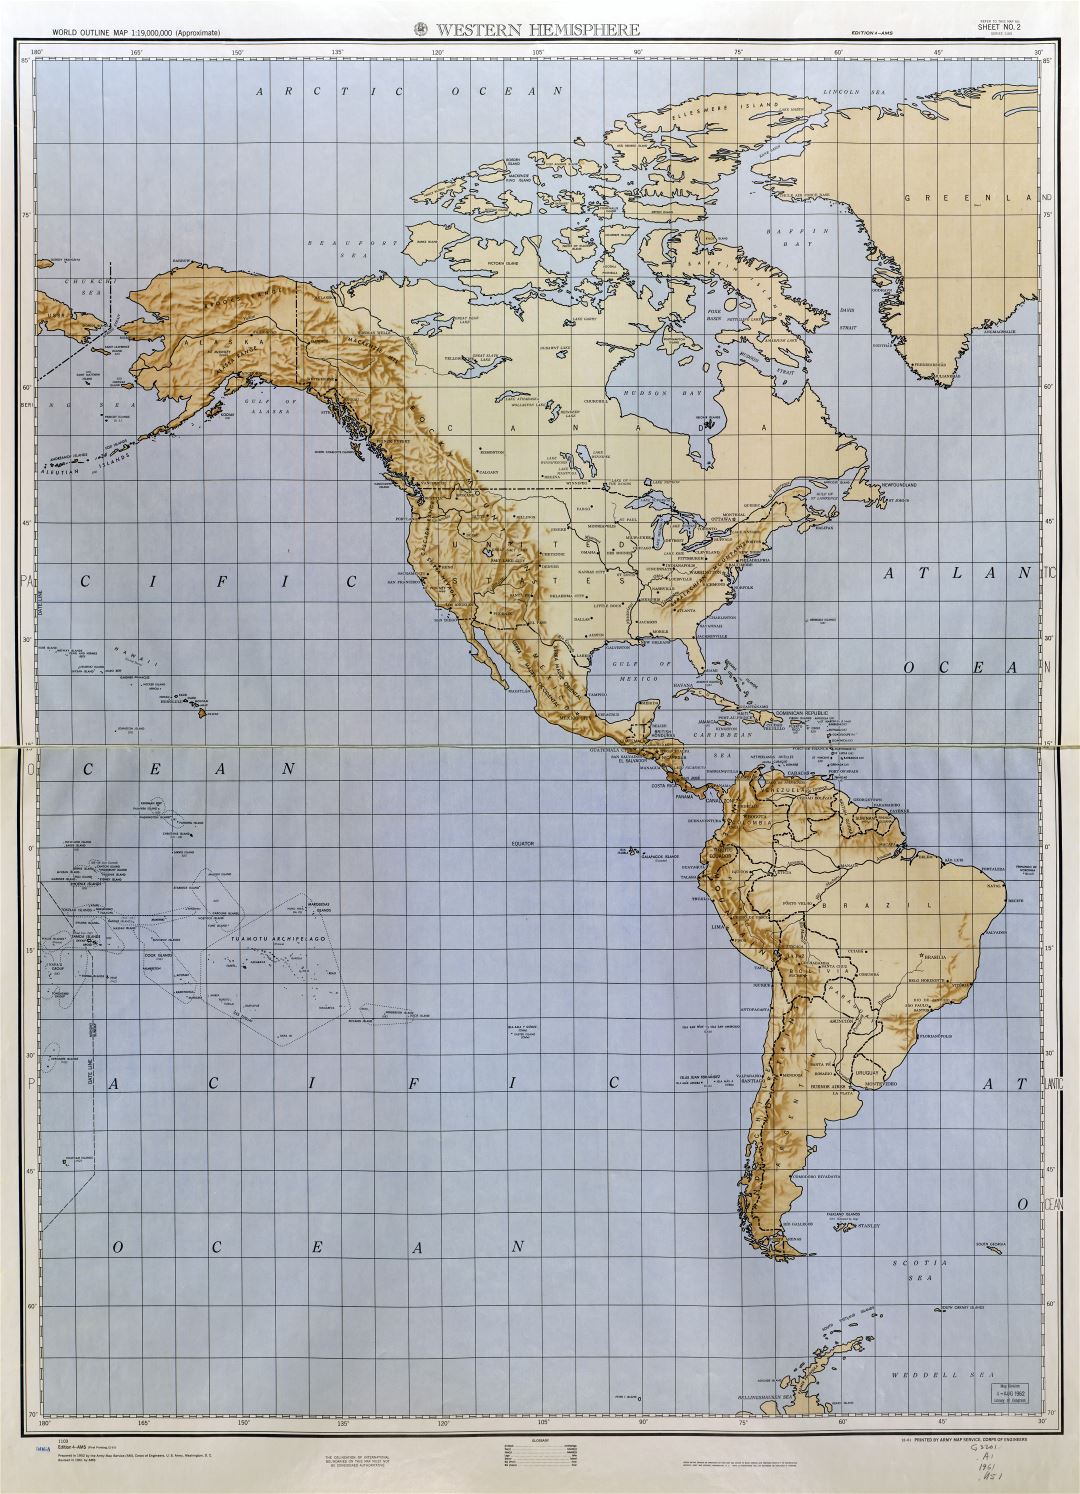 Large scale detailed World outline map with relief - part 1 (Western Hemisphere) 1961-62